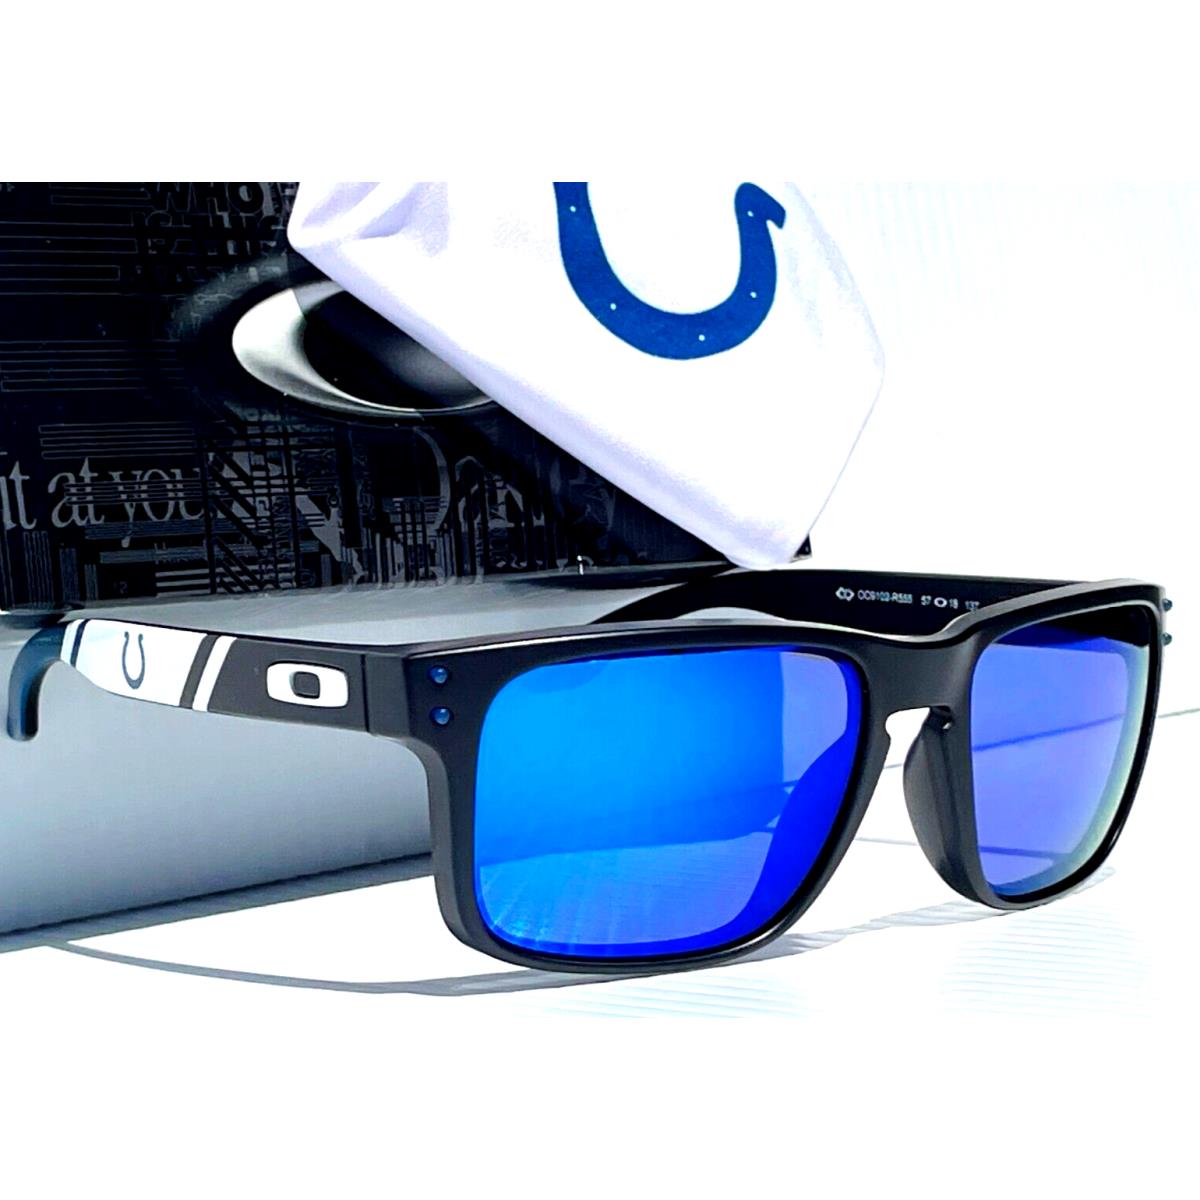 Nfl Oakley Holbrook Indianapolis Colts Polarized Galaxy Blue Sunglass 9102-R5